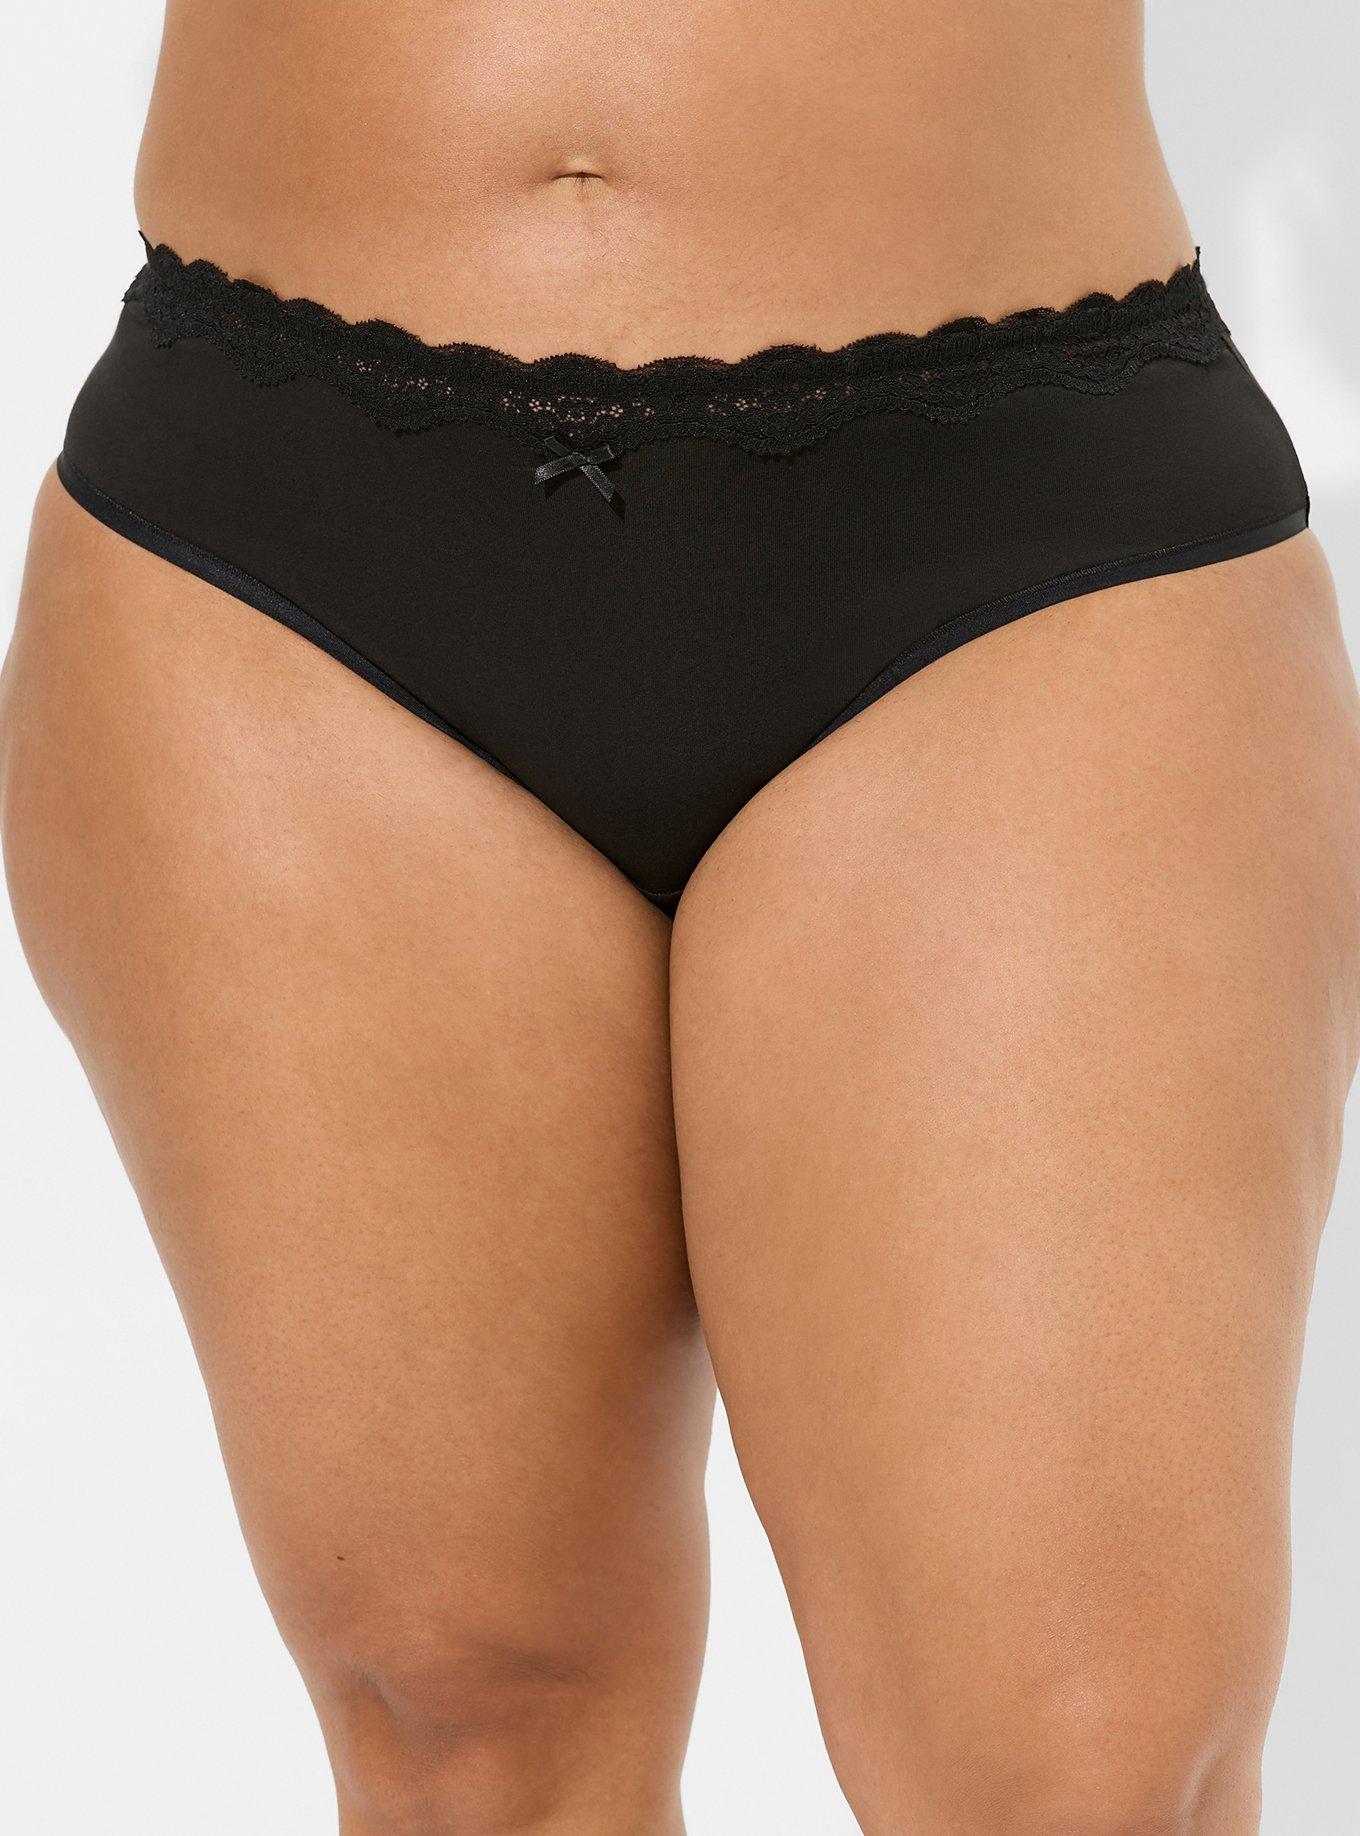 17 cute granny panties that will make you want to throw your thong